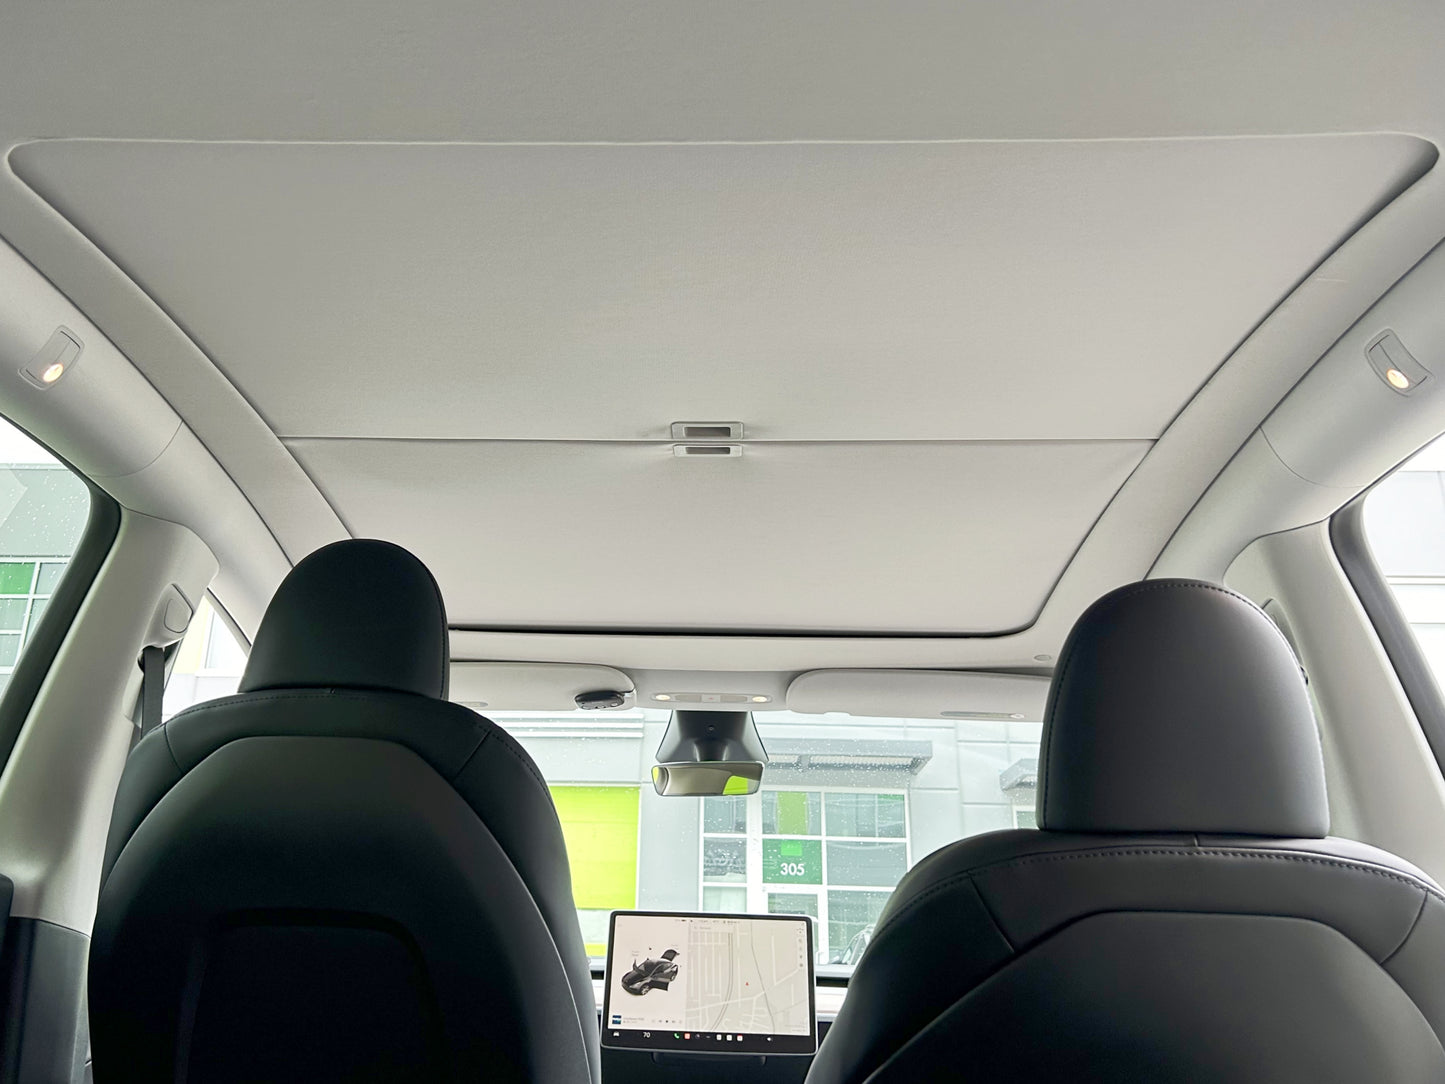 Model Y: Retractable Glass Roof Sunshade